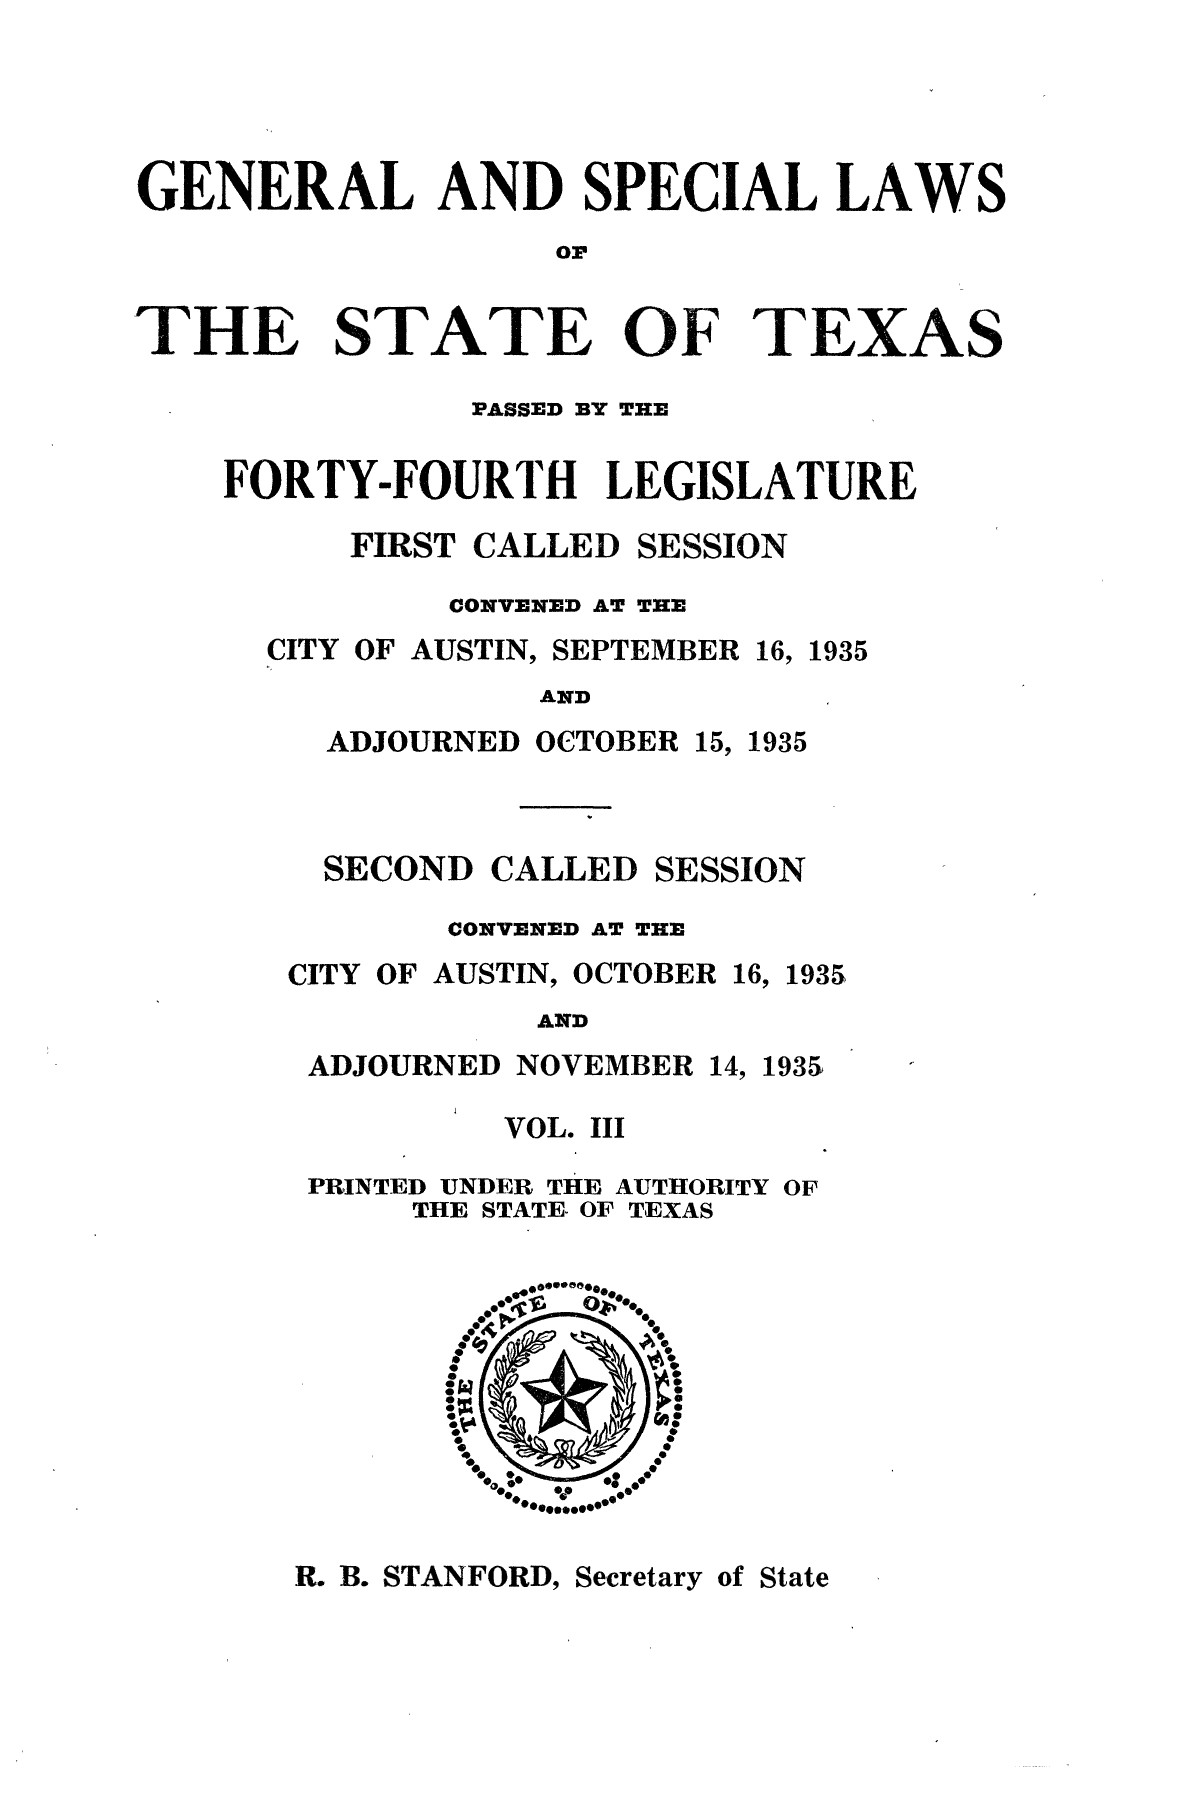 The Laws of Texas, 1935-1937 [Volume 30]
                                                
                                                    [Sequence #]: 3 of 2460
                                                